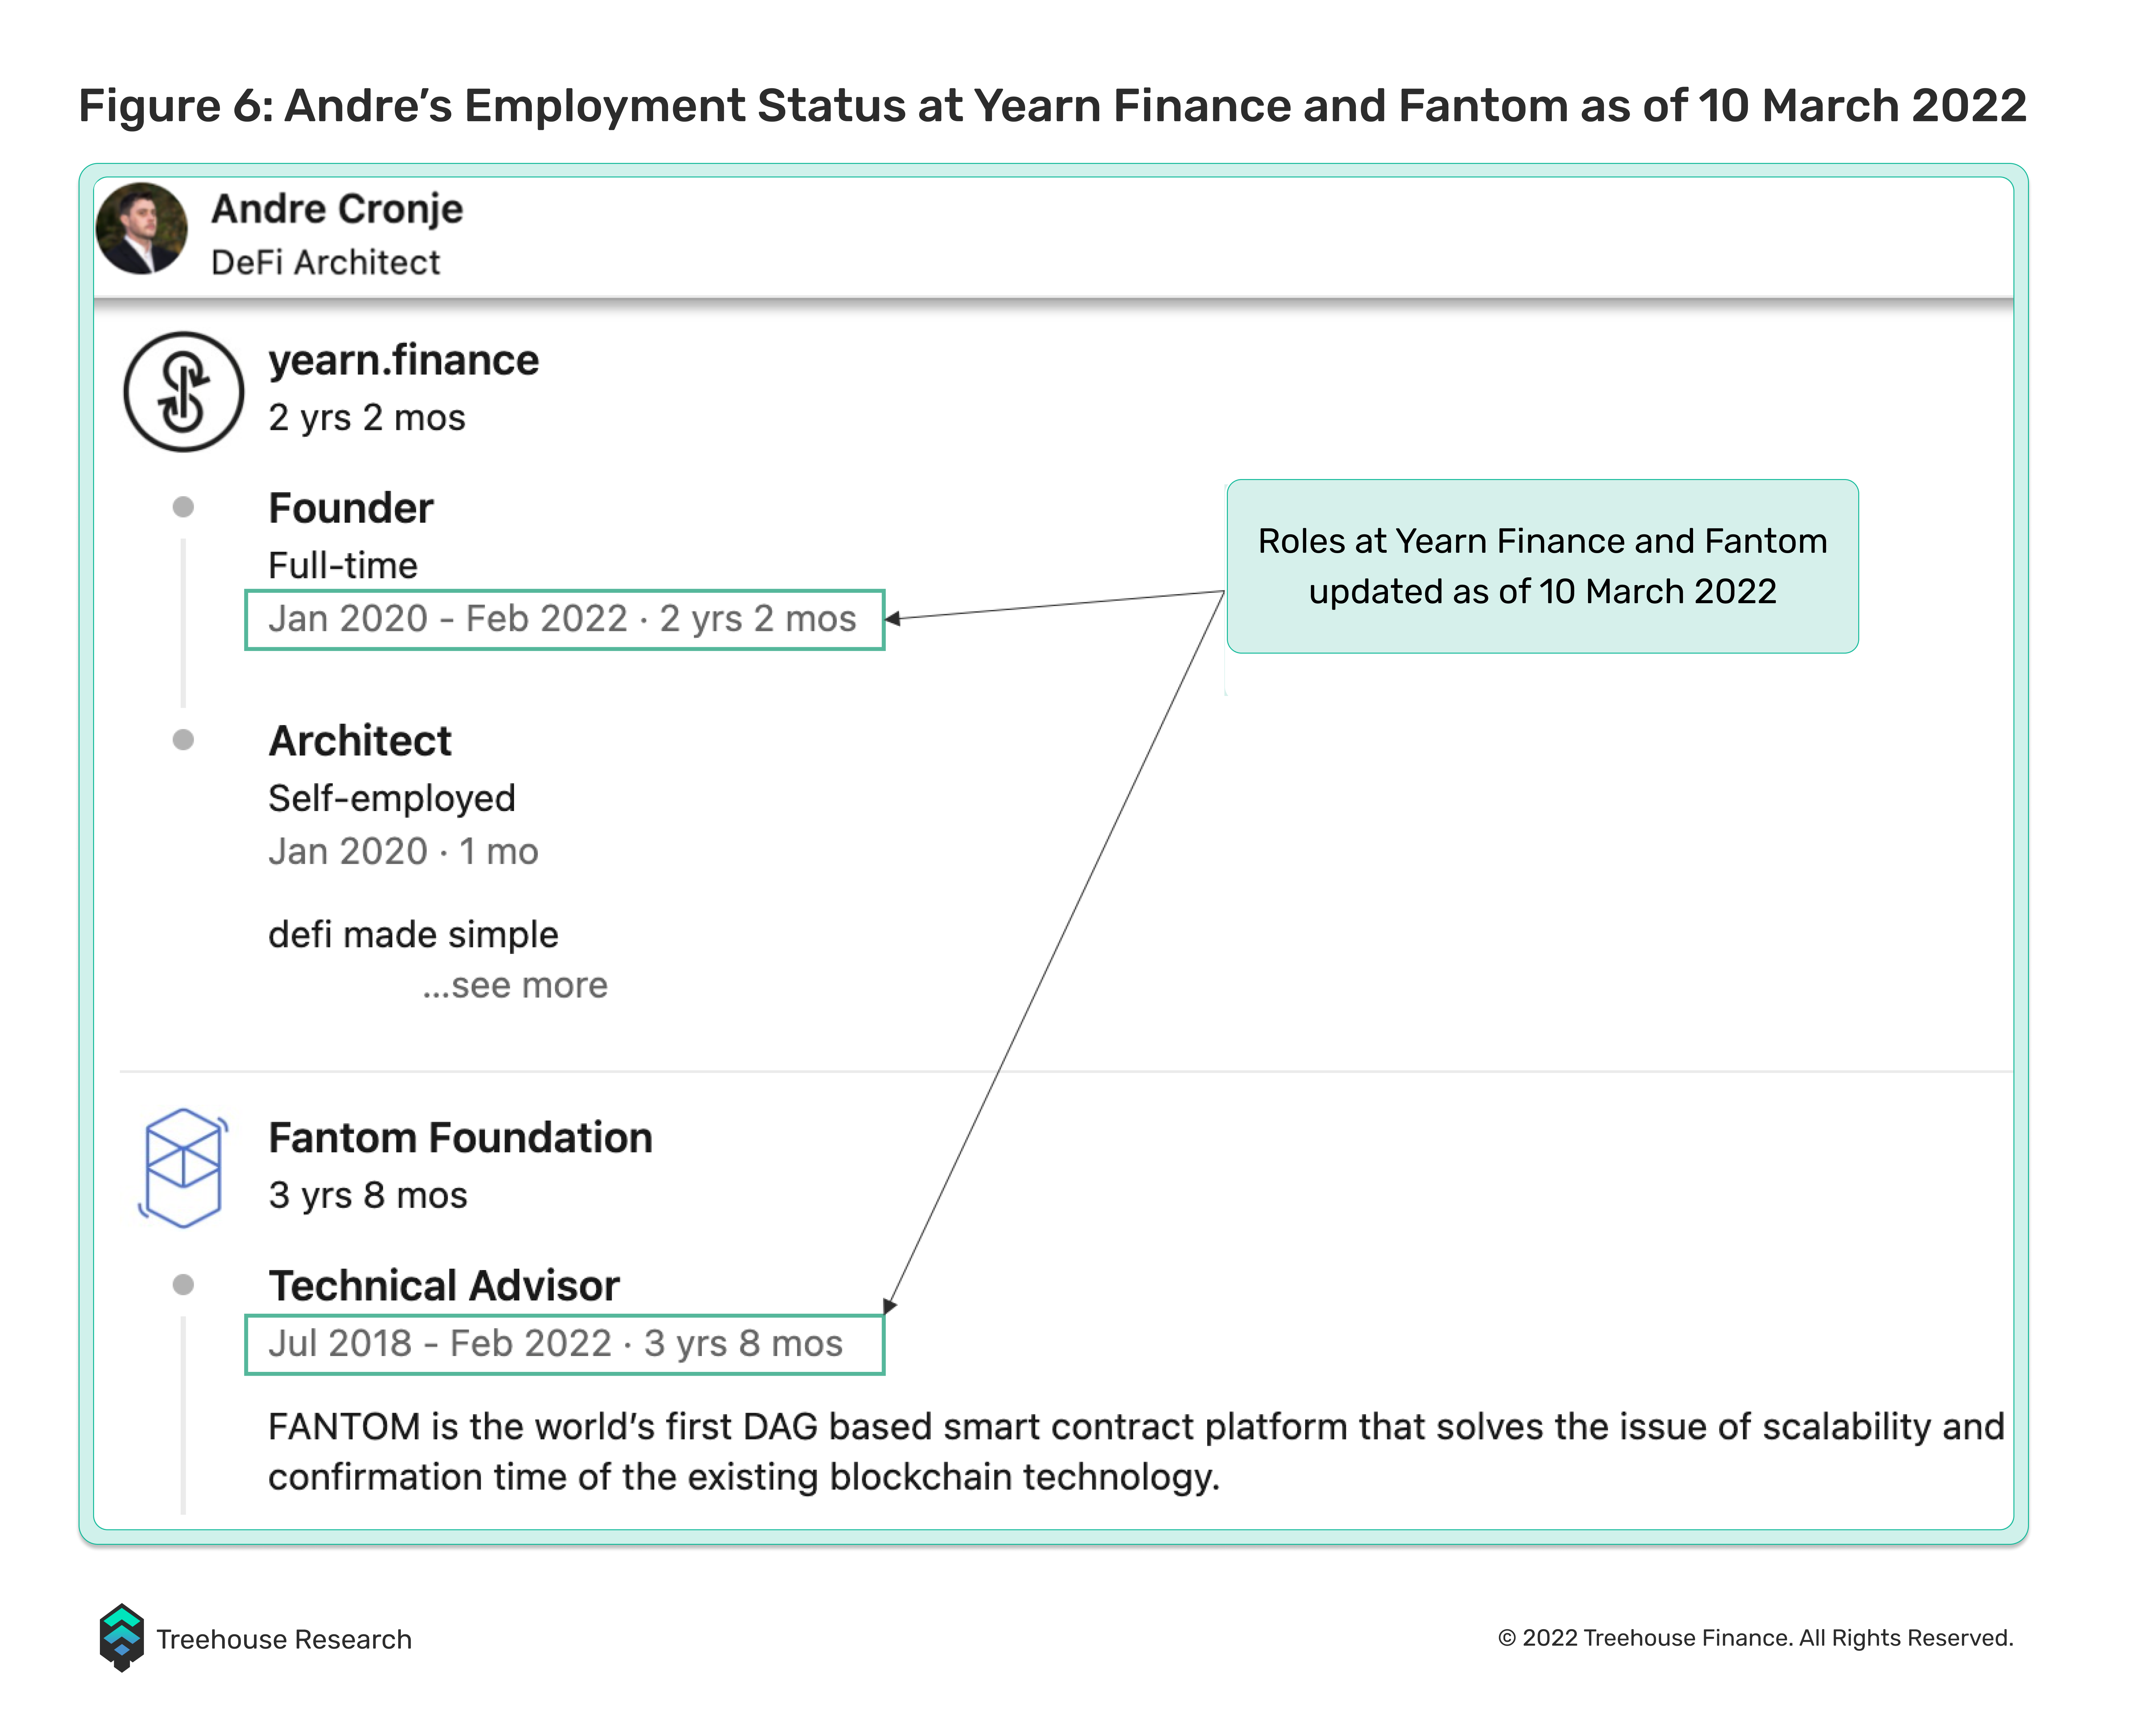 andre cronje's employment status at yearn finance and fantom as of 10 march 2022